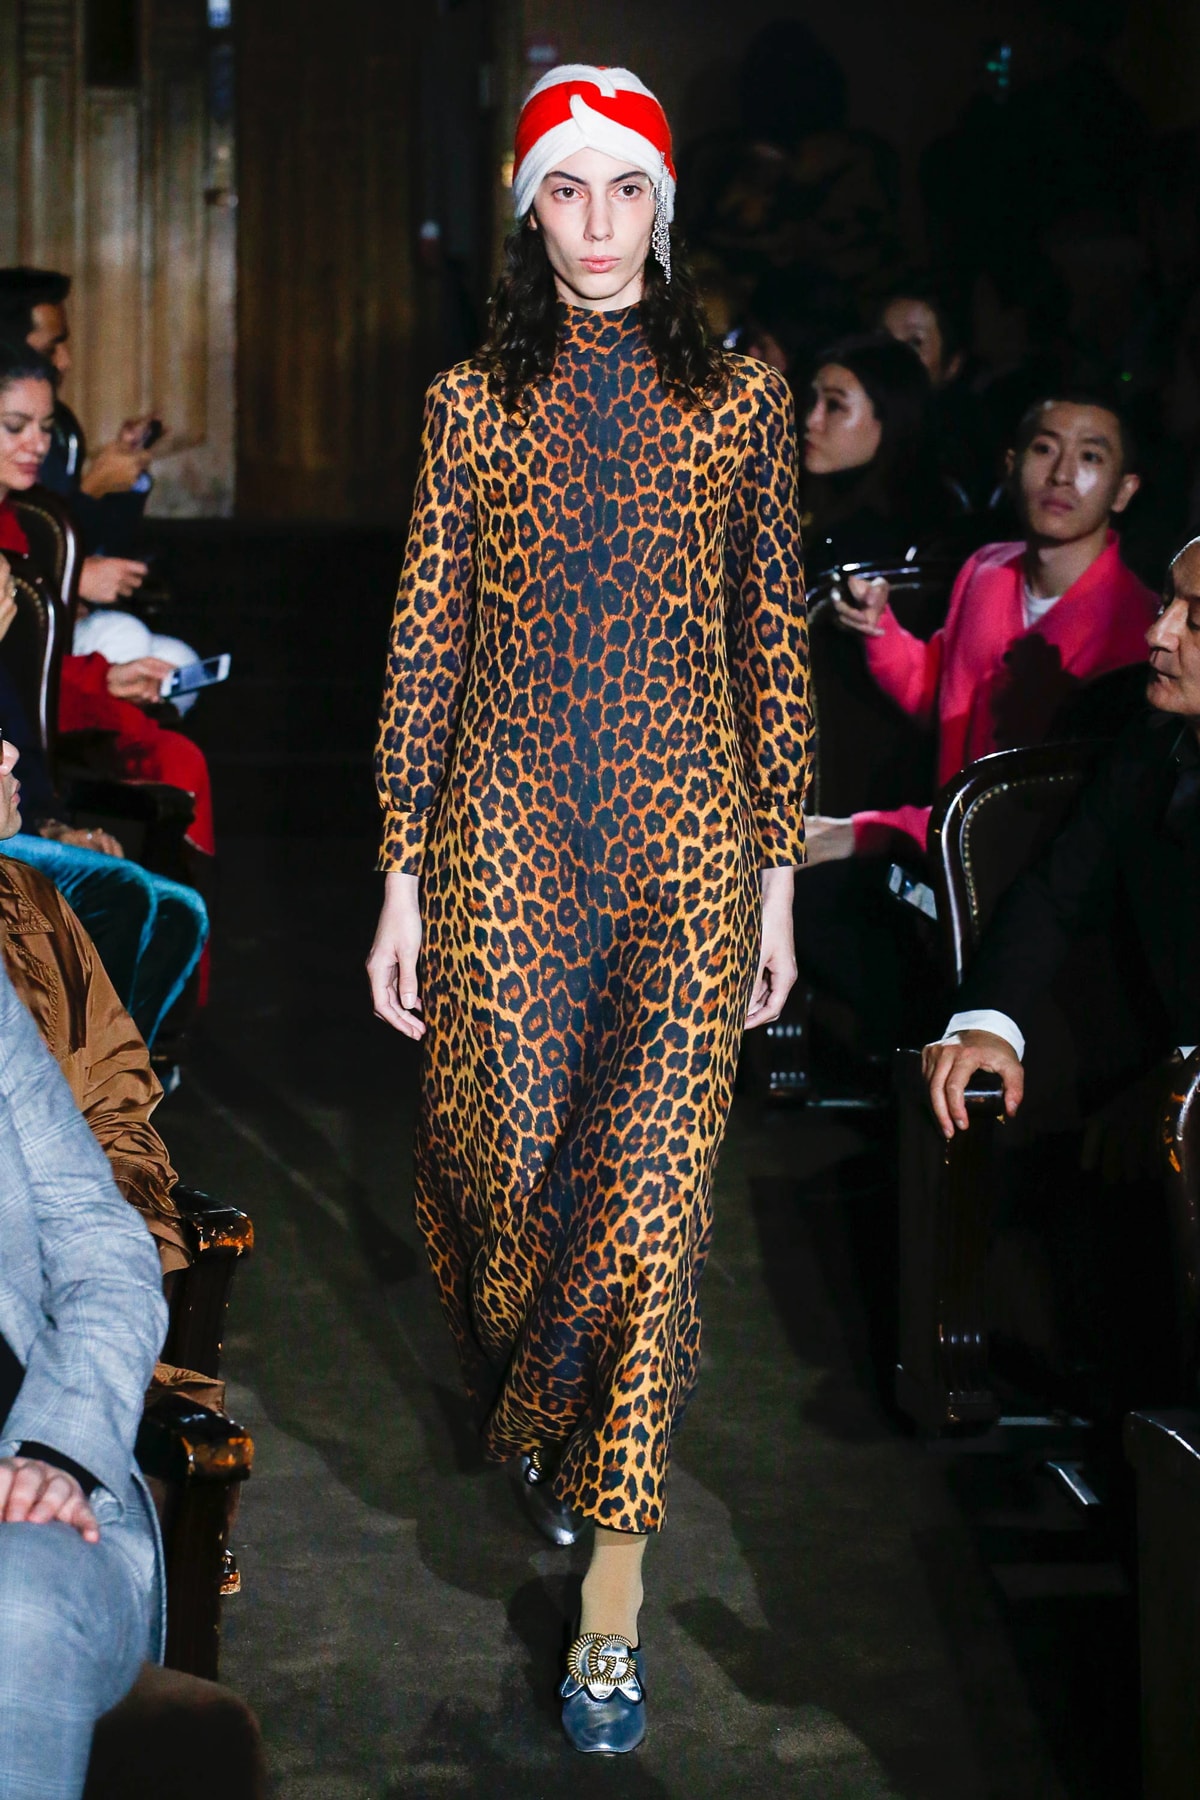 Gucci Alessandro Michelle Spring Summer 2019 Paris Fashion Week Show Collection Leopard Dress Brown Black Knit Turban Hat White Red